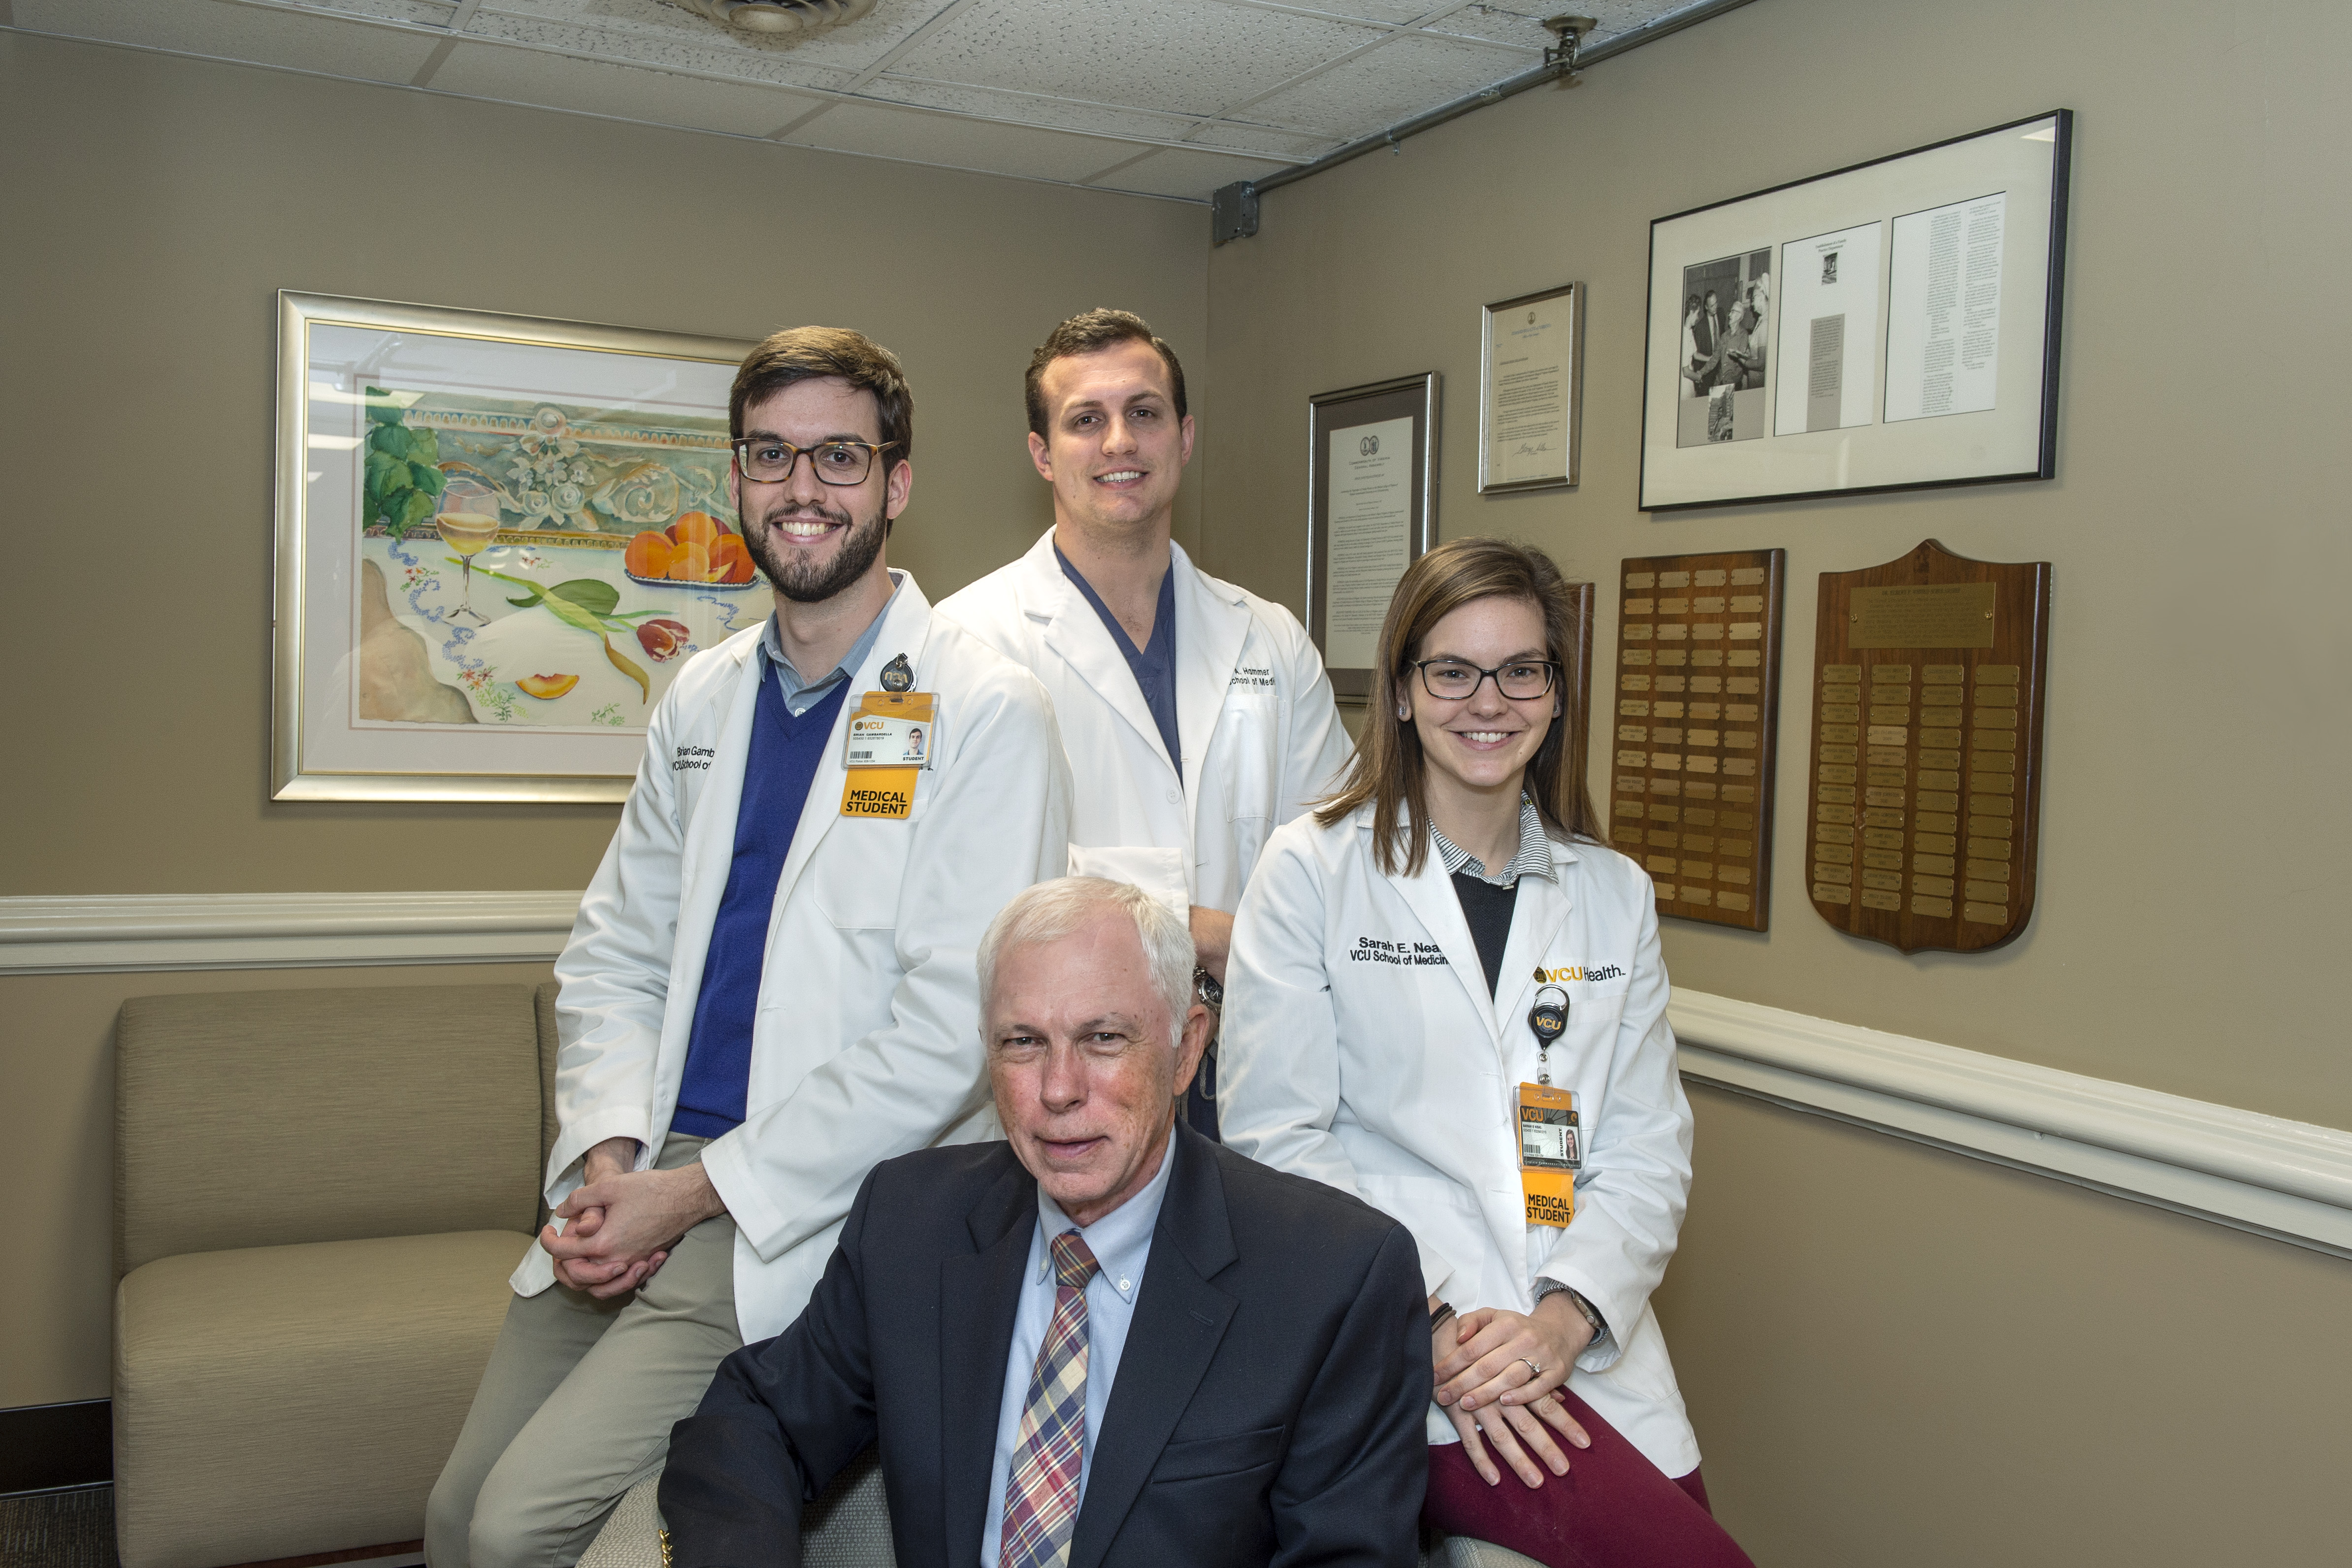 Family medicine students with donor